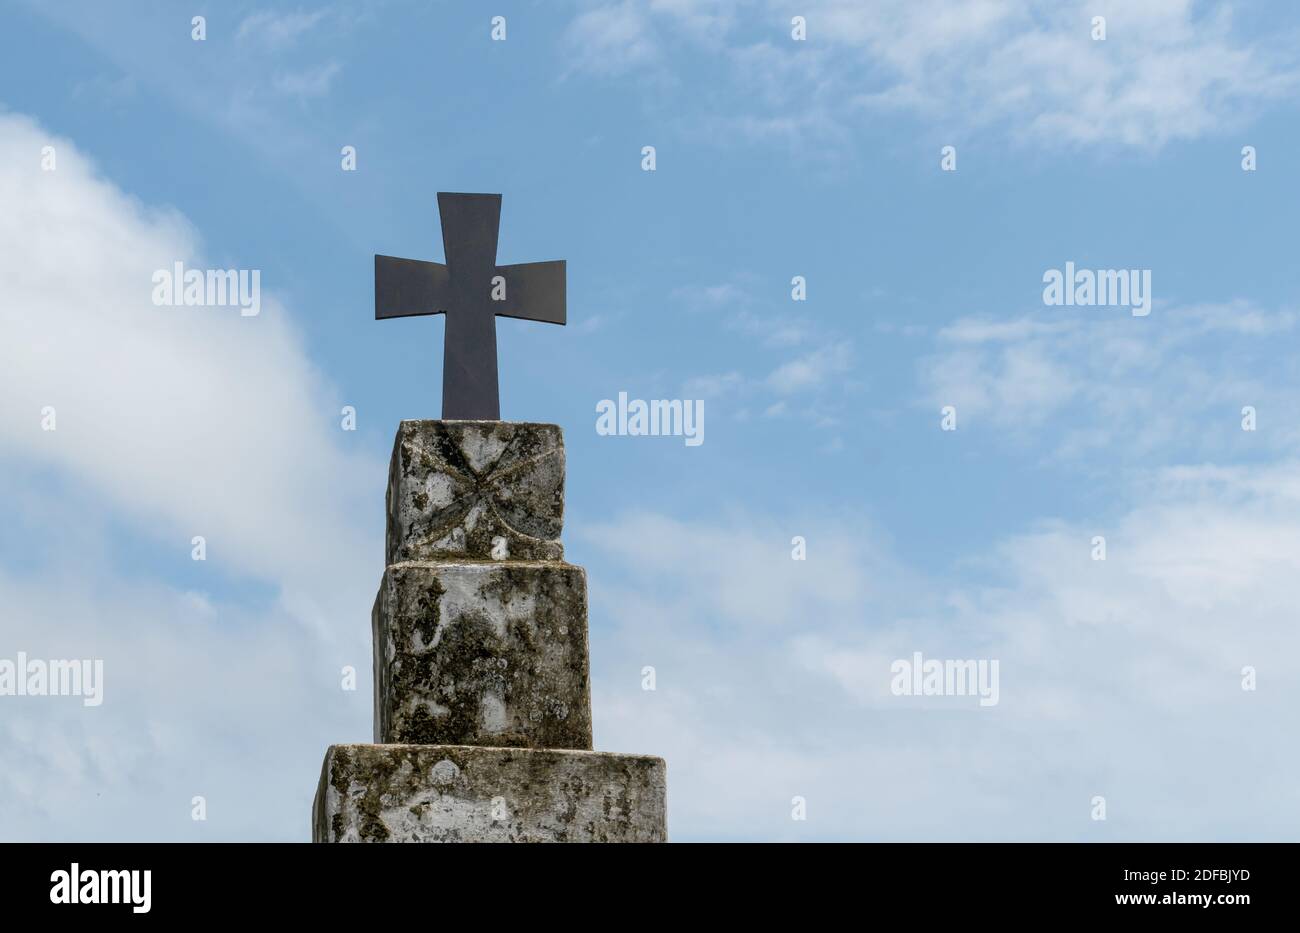 Beautiful photo of holy cross fixed on top of vintage pillar with blue sky and sparse white clouds in background. Stock Photo